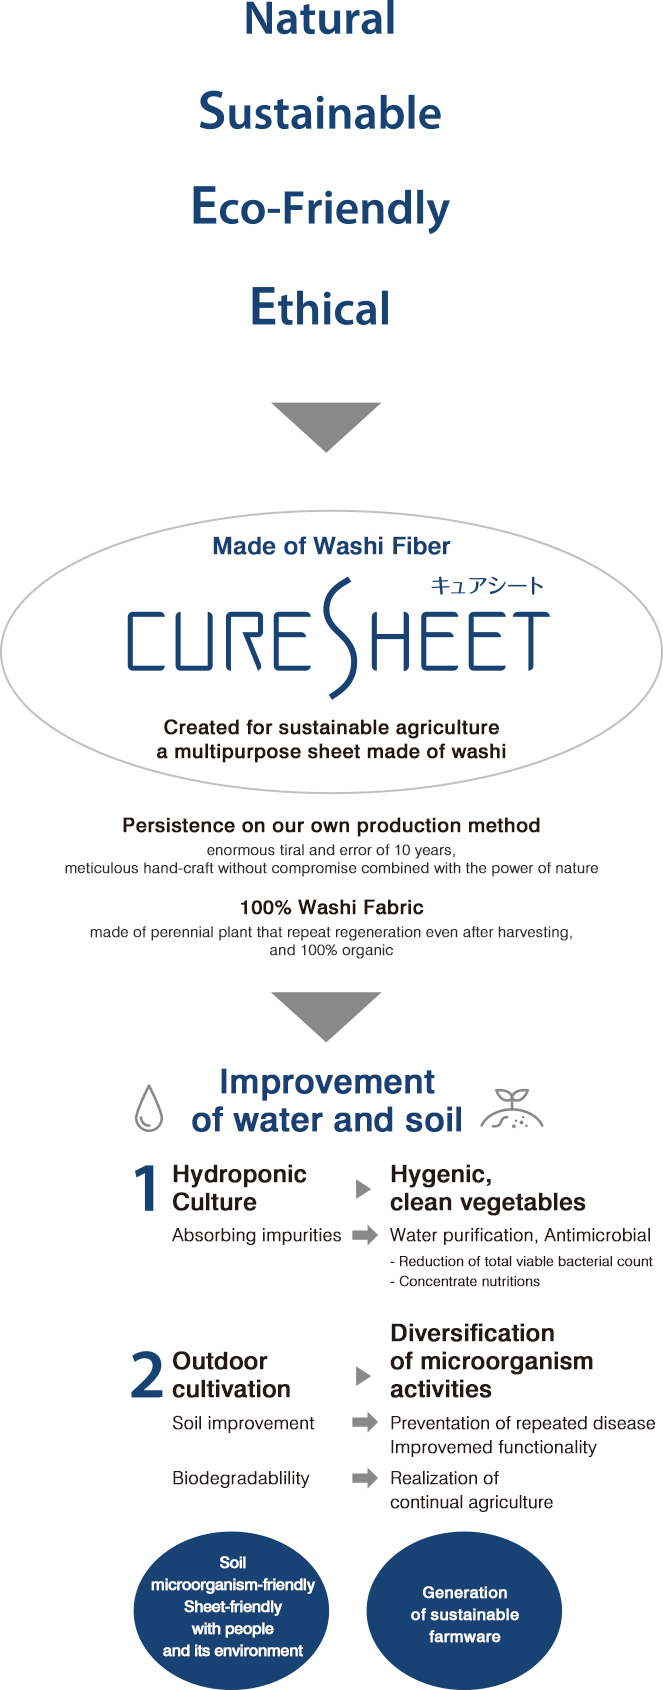 Curesheet, Created for sustainable agriculture a multipurpose sheet made of washi